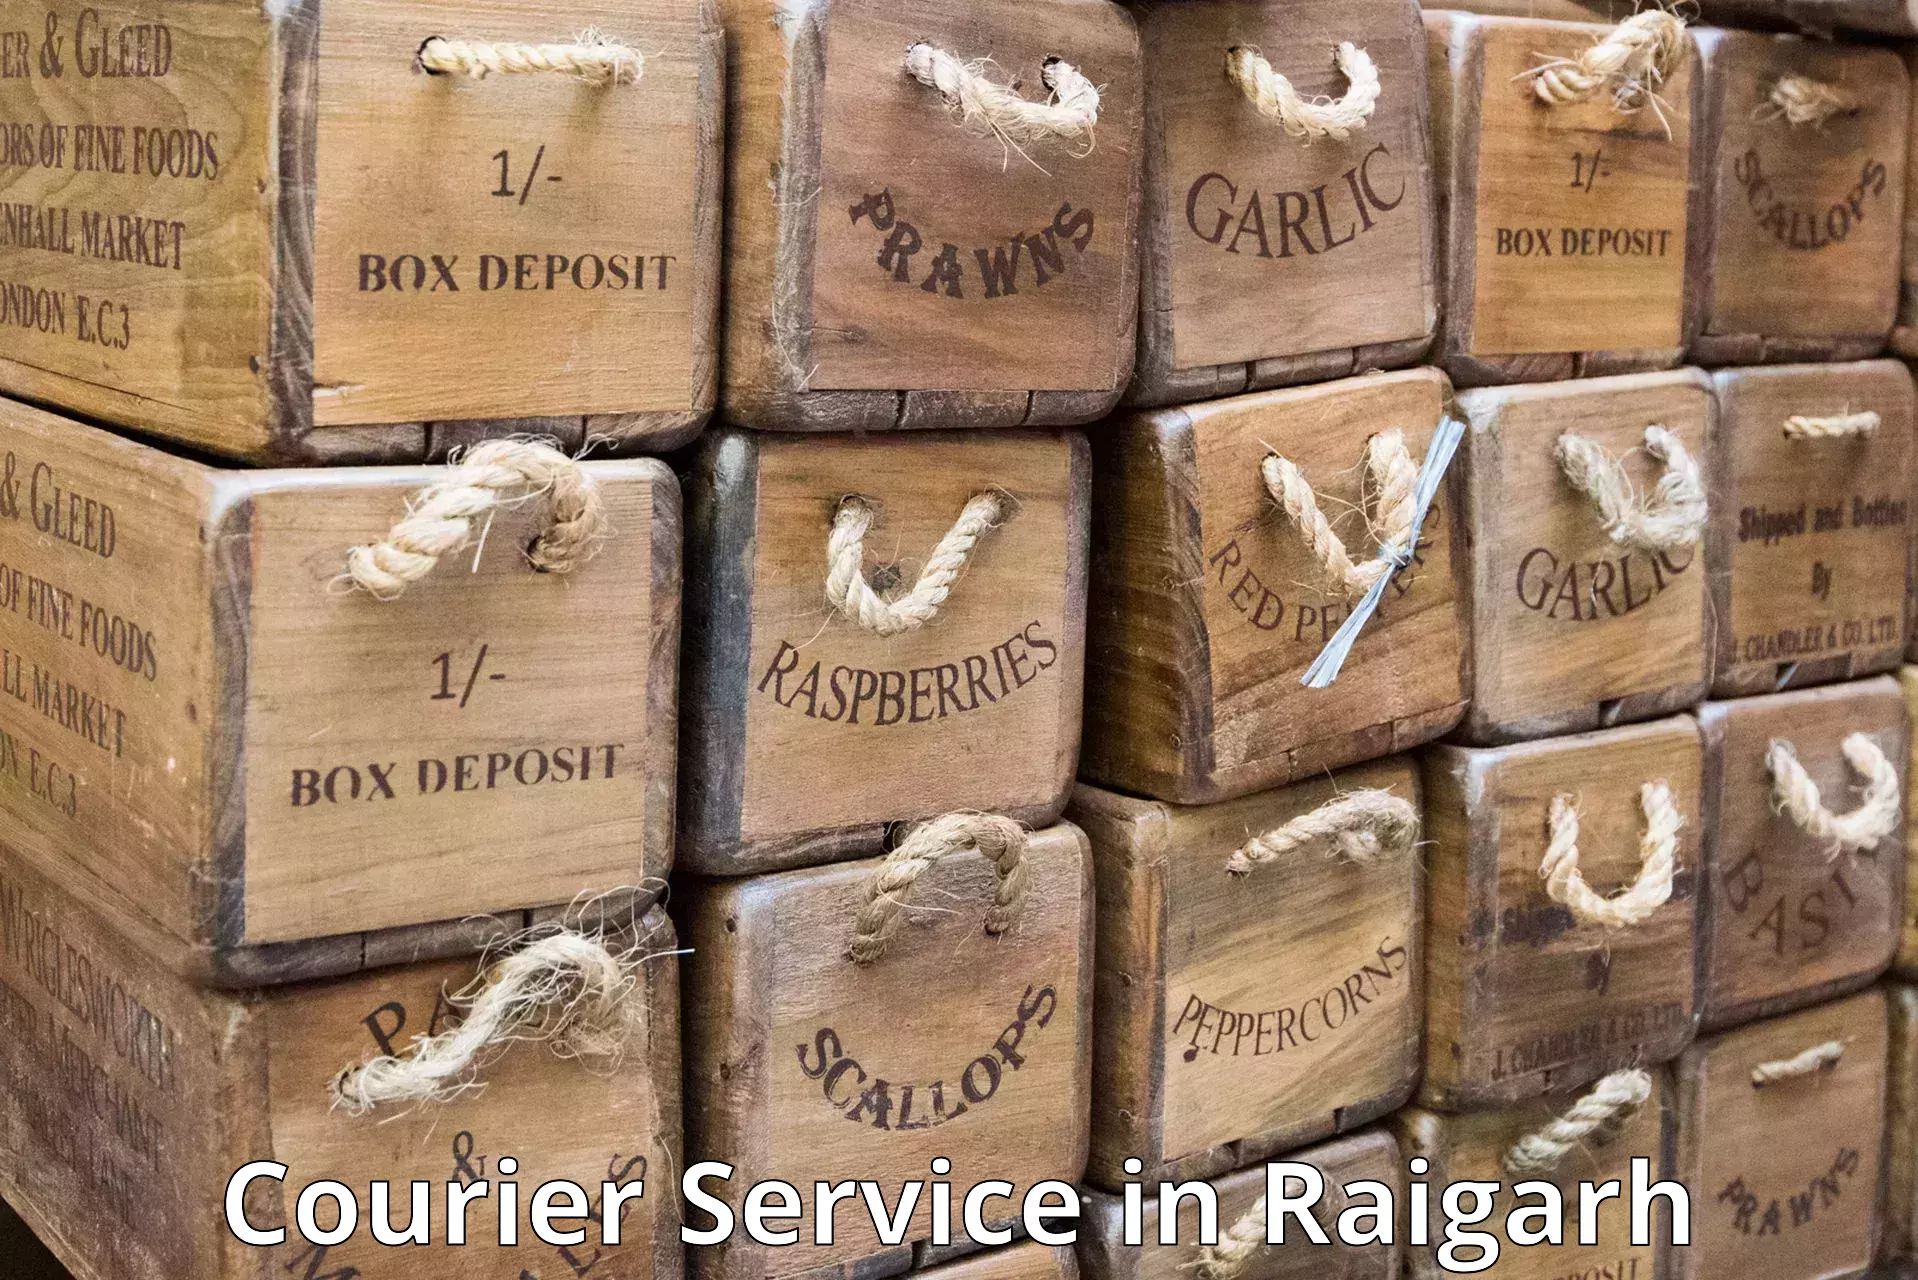 Express postal services in Raigarh